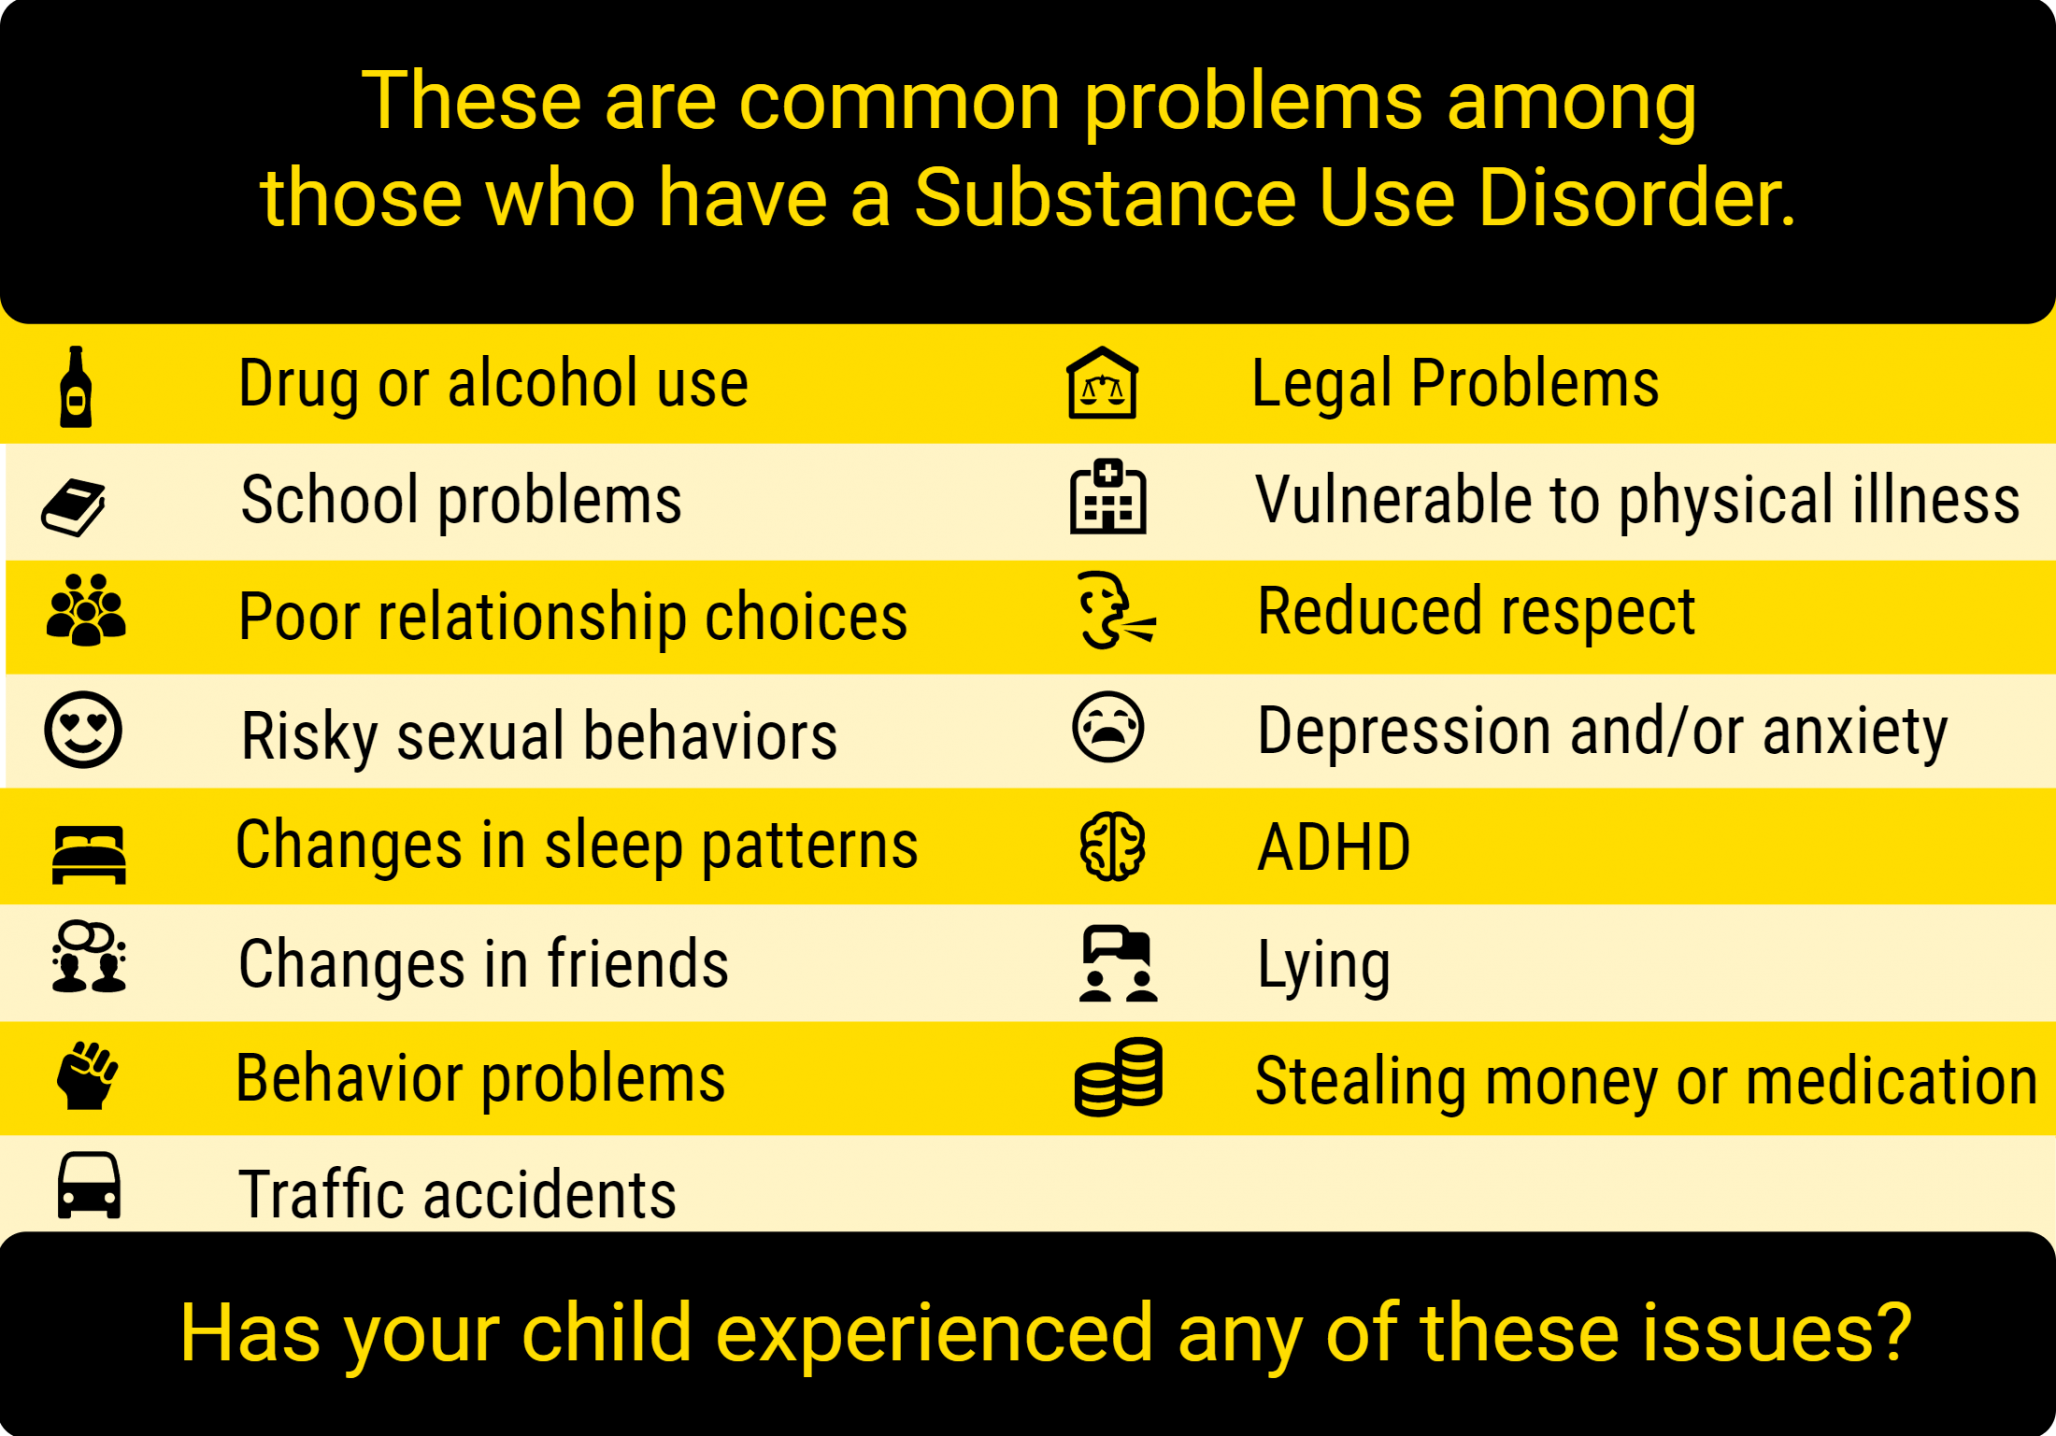 Common Problems Among those with Substance Use Disorders include: drug or alcohol use, school problems, poor relationship choices, risky sexual behavior, behavior problems, traffic accidents, legal problems, short-term memory, etc.